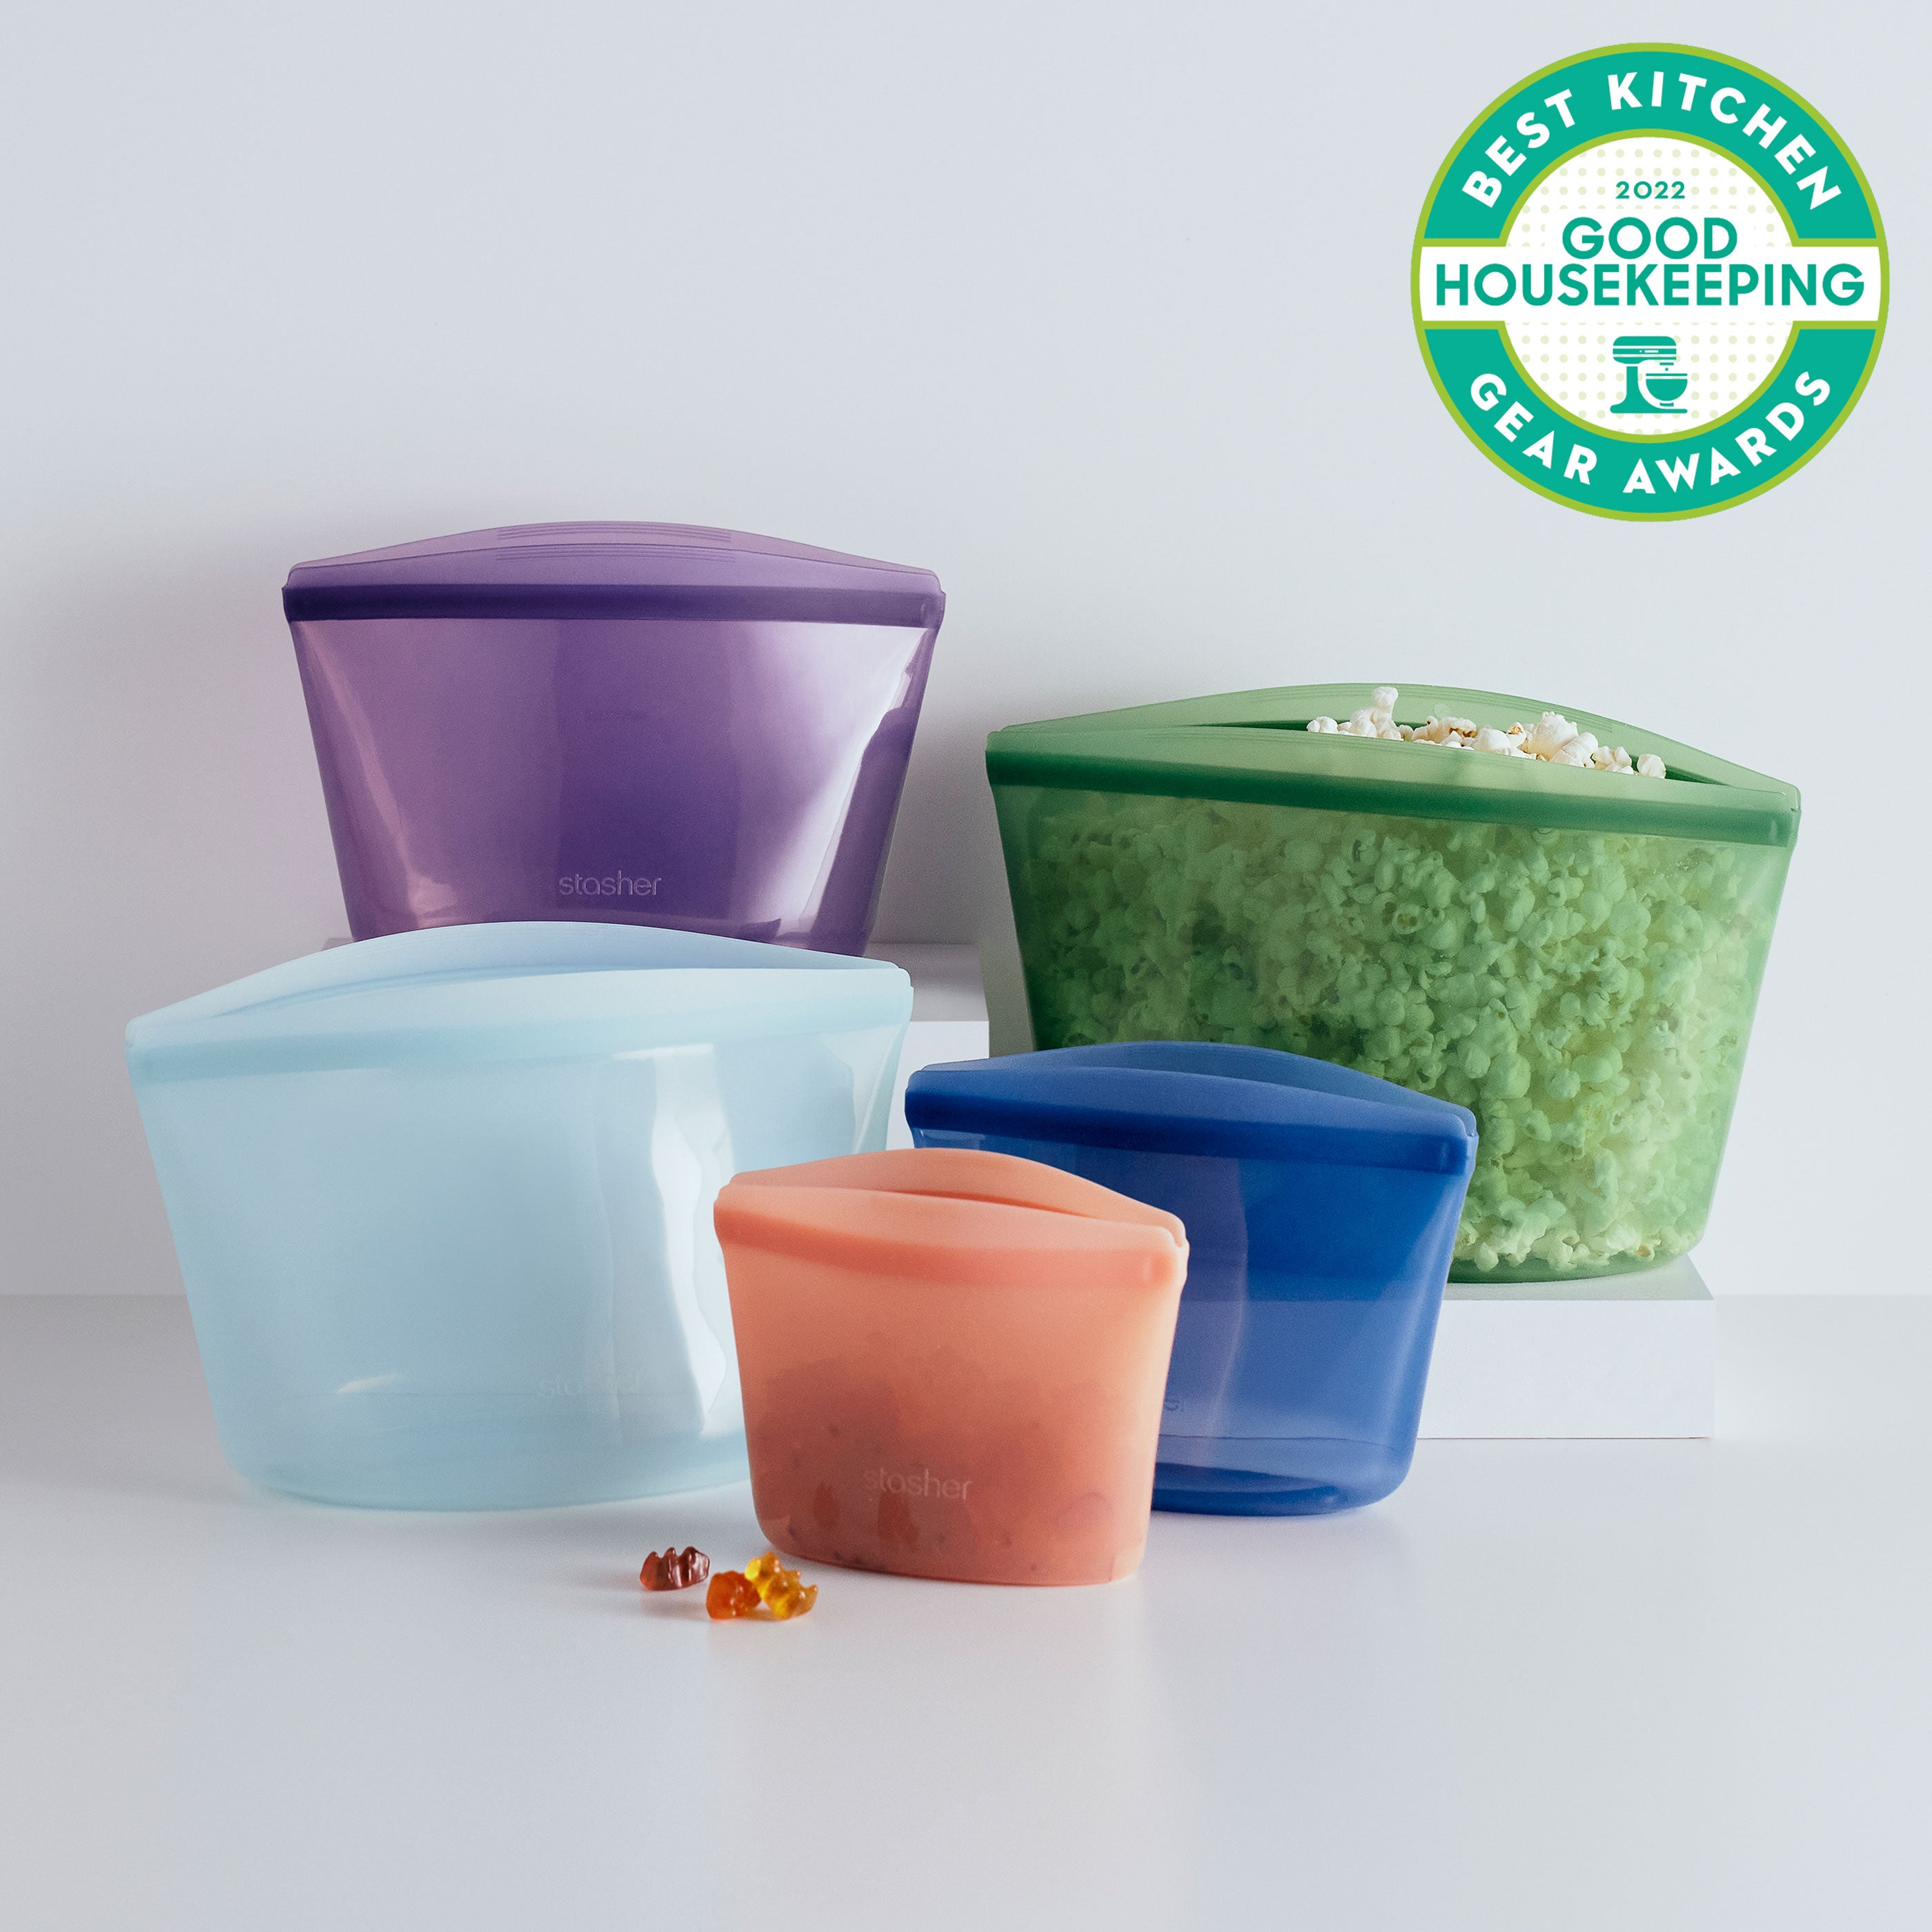 Reviewers Call These $20 Reusable Silicone Pot Covers the